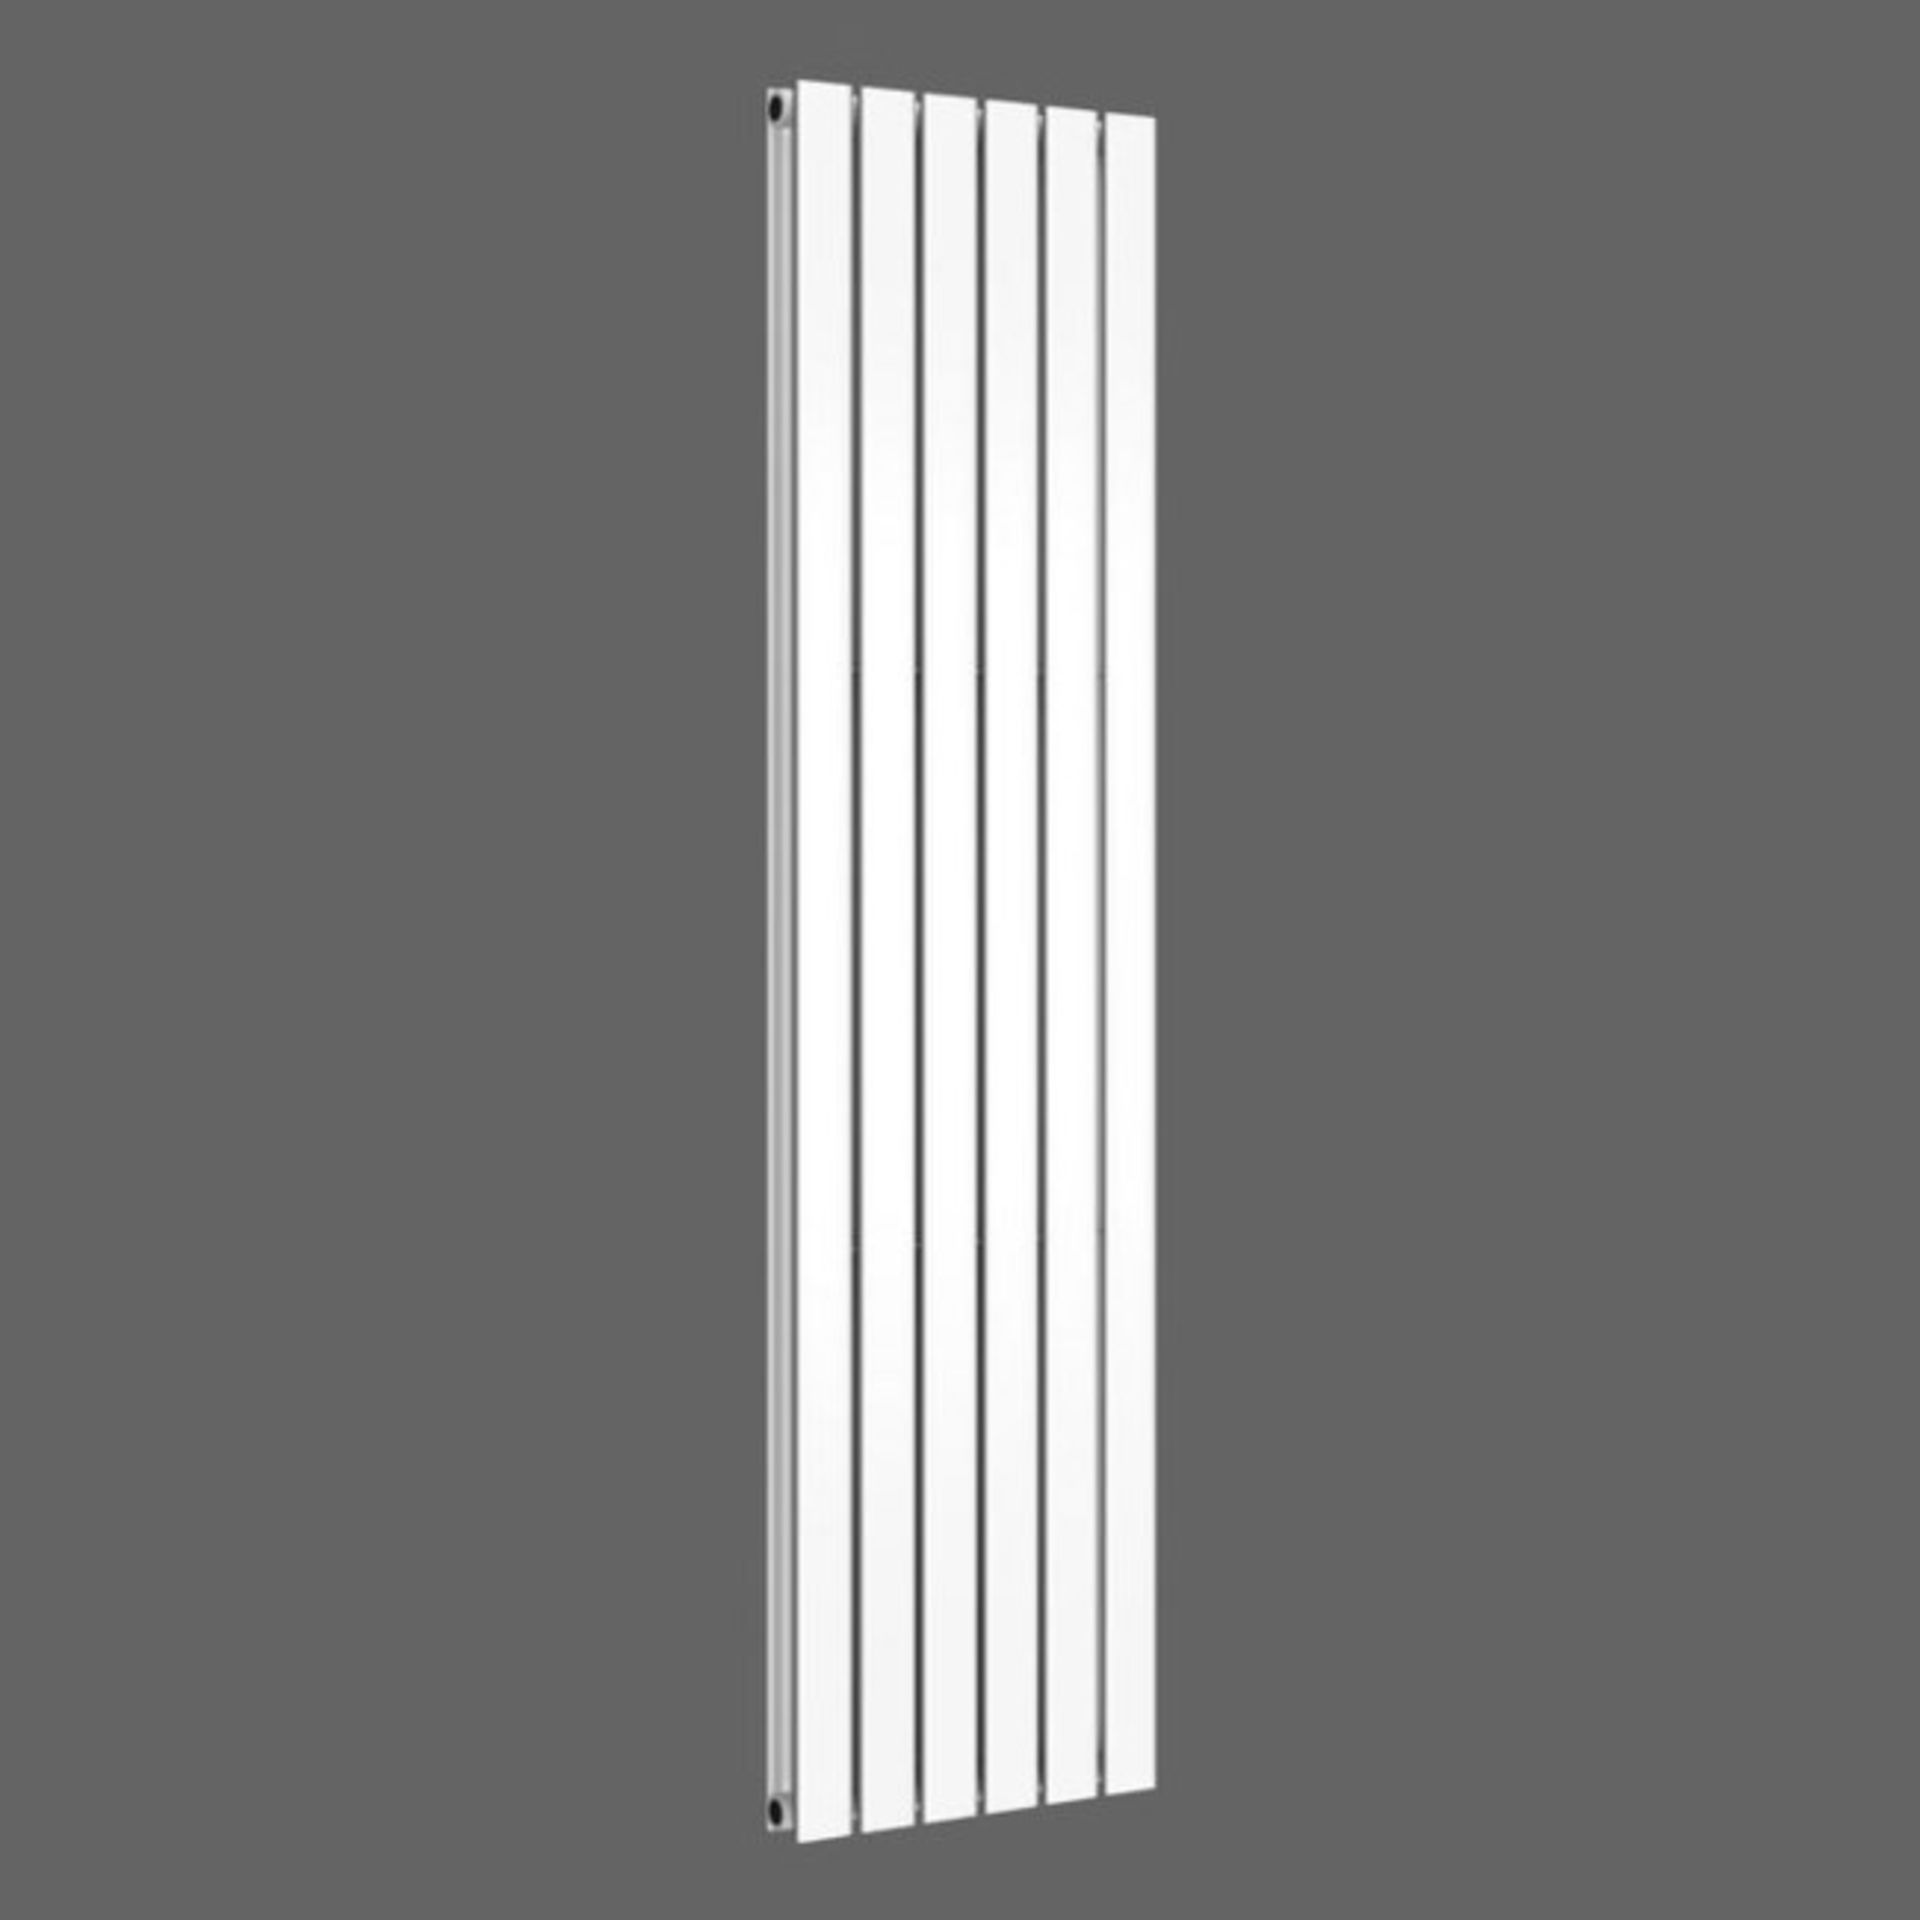 NEW & BOXED 1800x480mm Gloss White Single Flat Panel Vertical Radiator. RRP £309.99.We love th... - Image 2 of 2